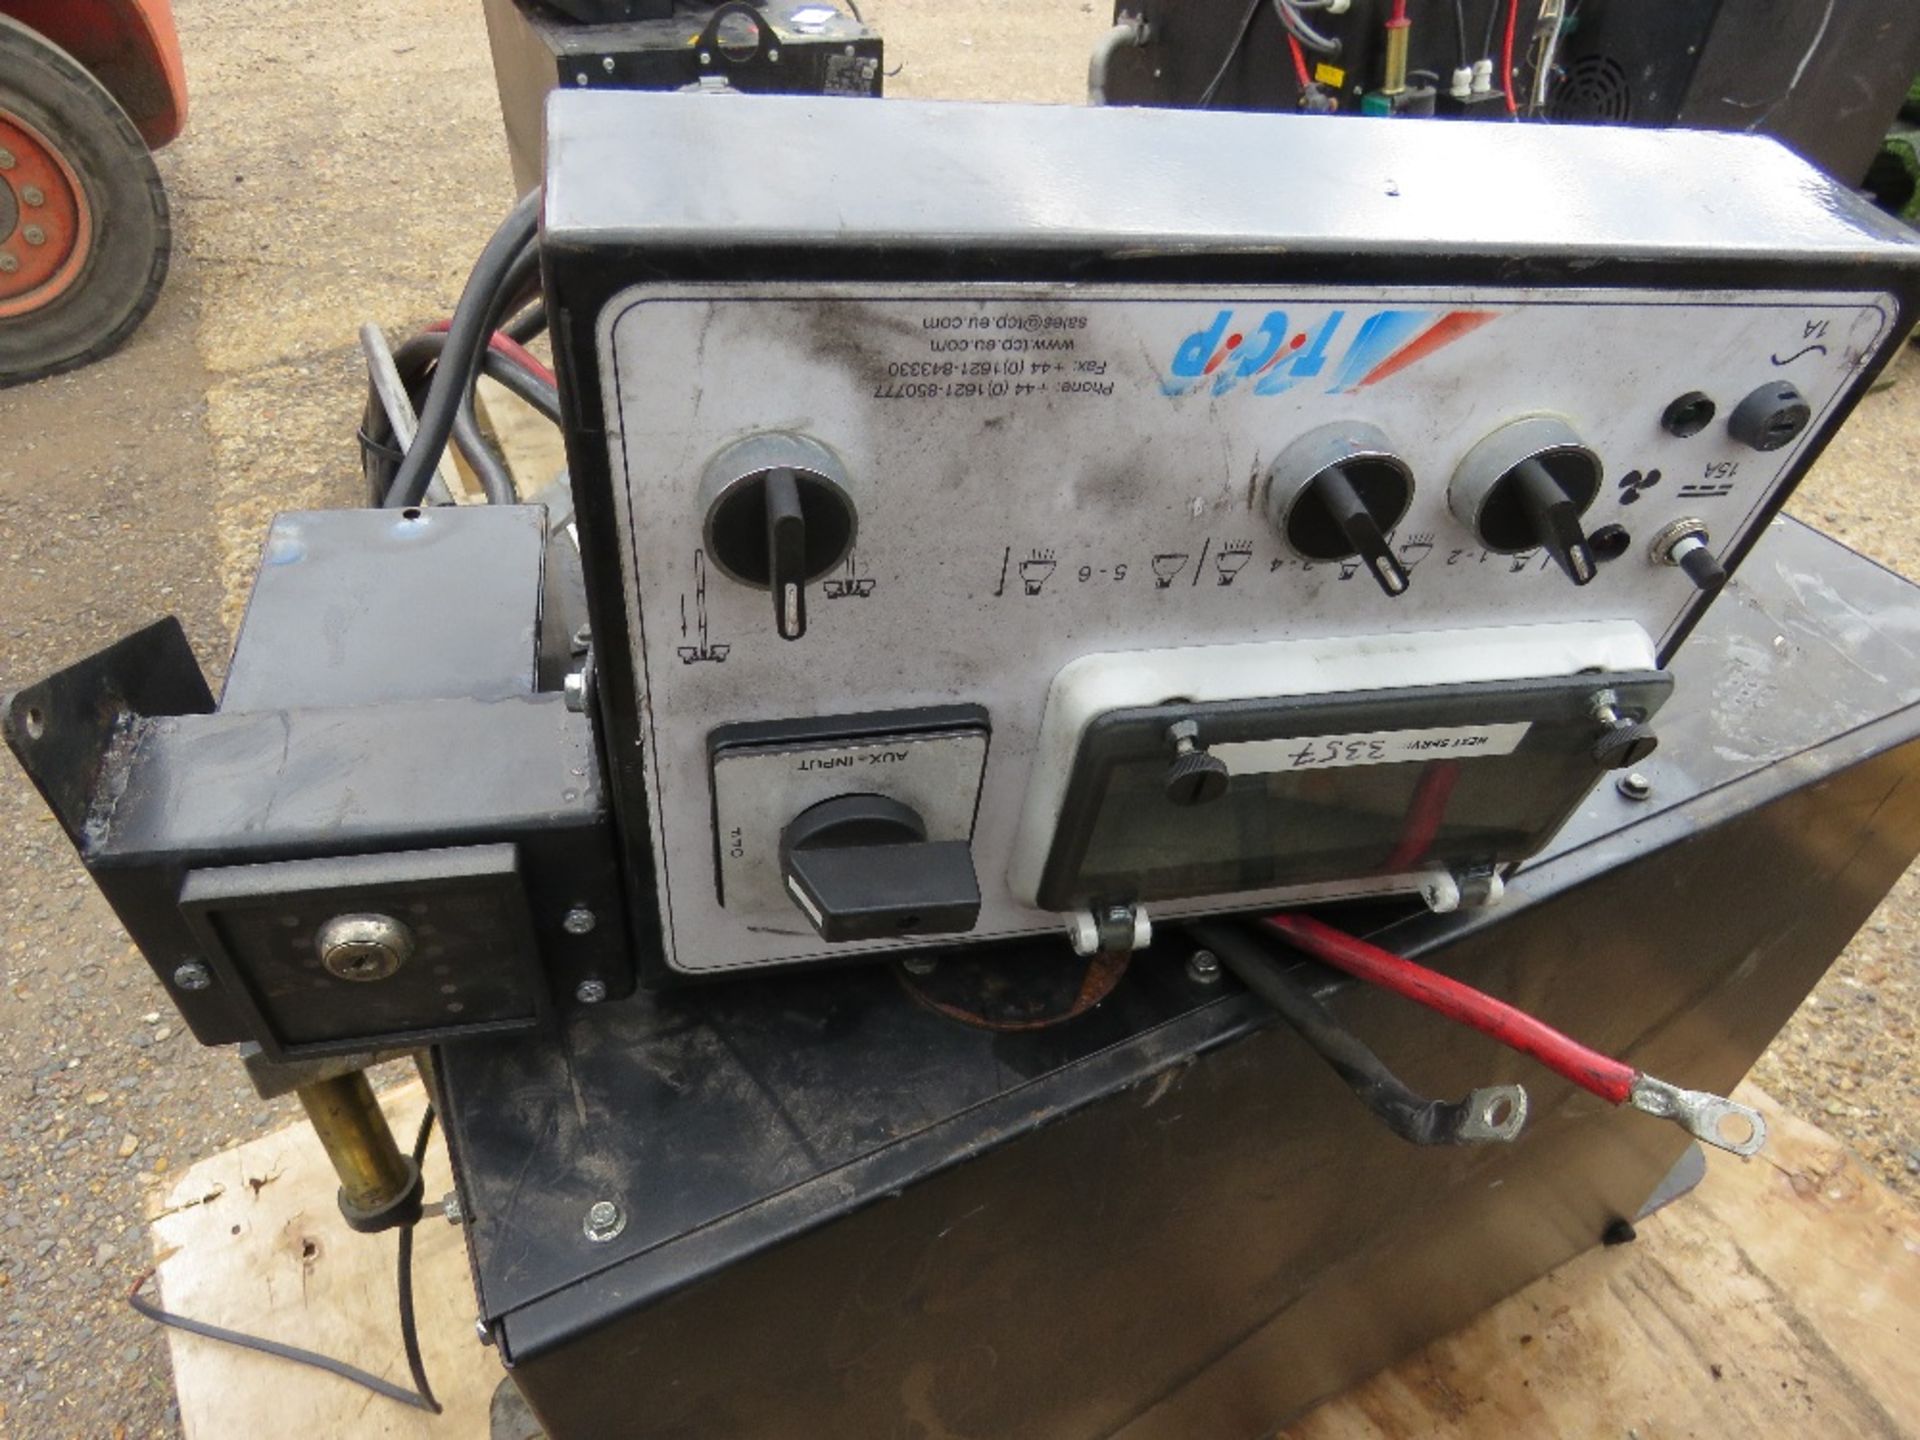 HATZ DIESEL ENGINED PACKAGED GENERATOR SET WITH CONTROL UNIT, 3.1KW RATED OUTPUT. - Image 2 of 5